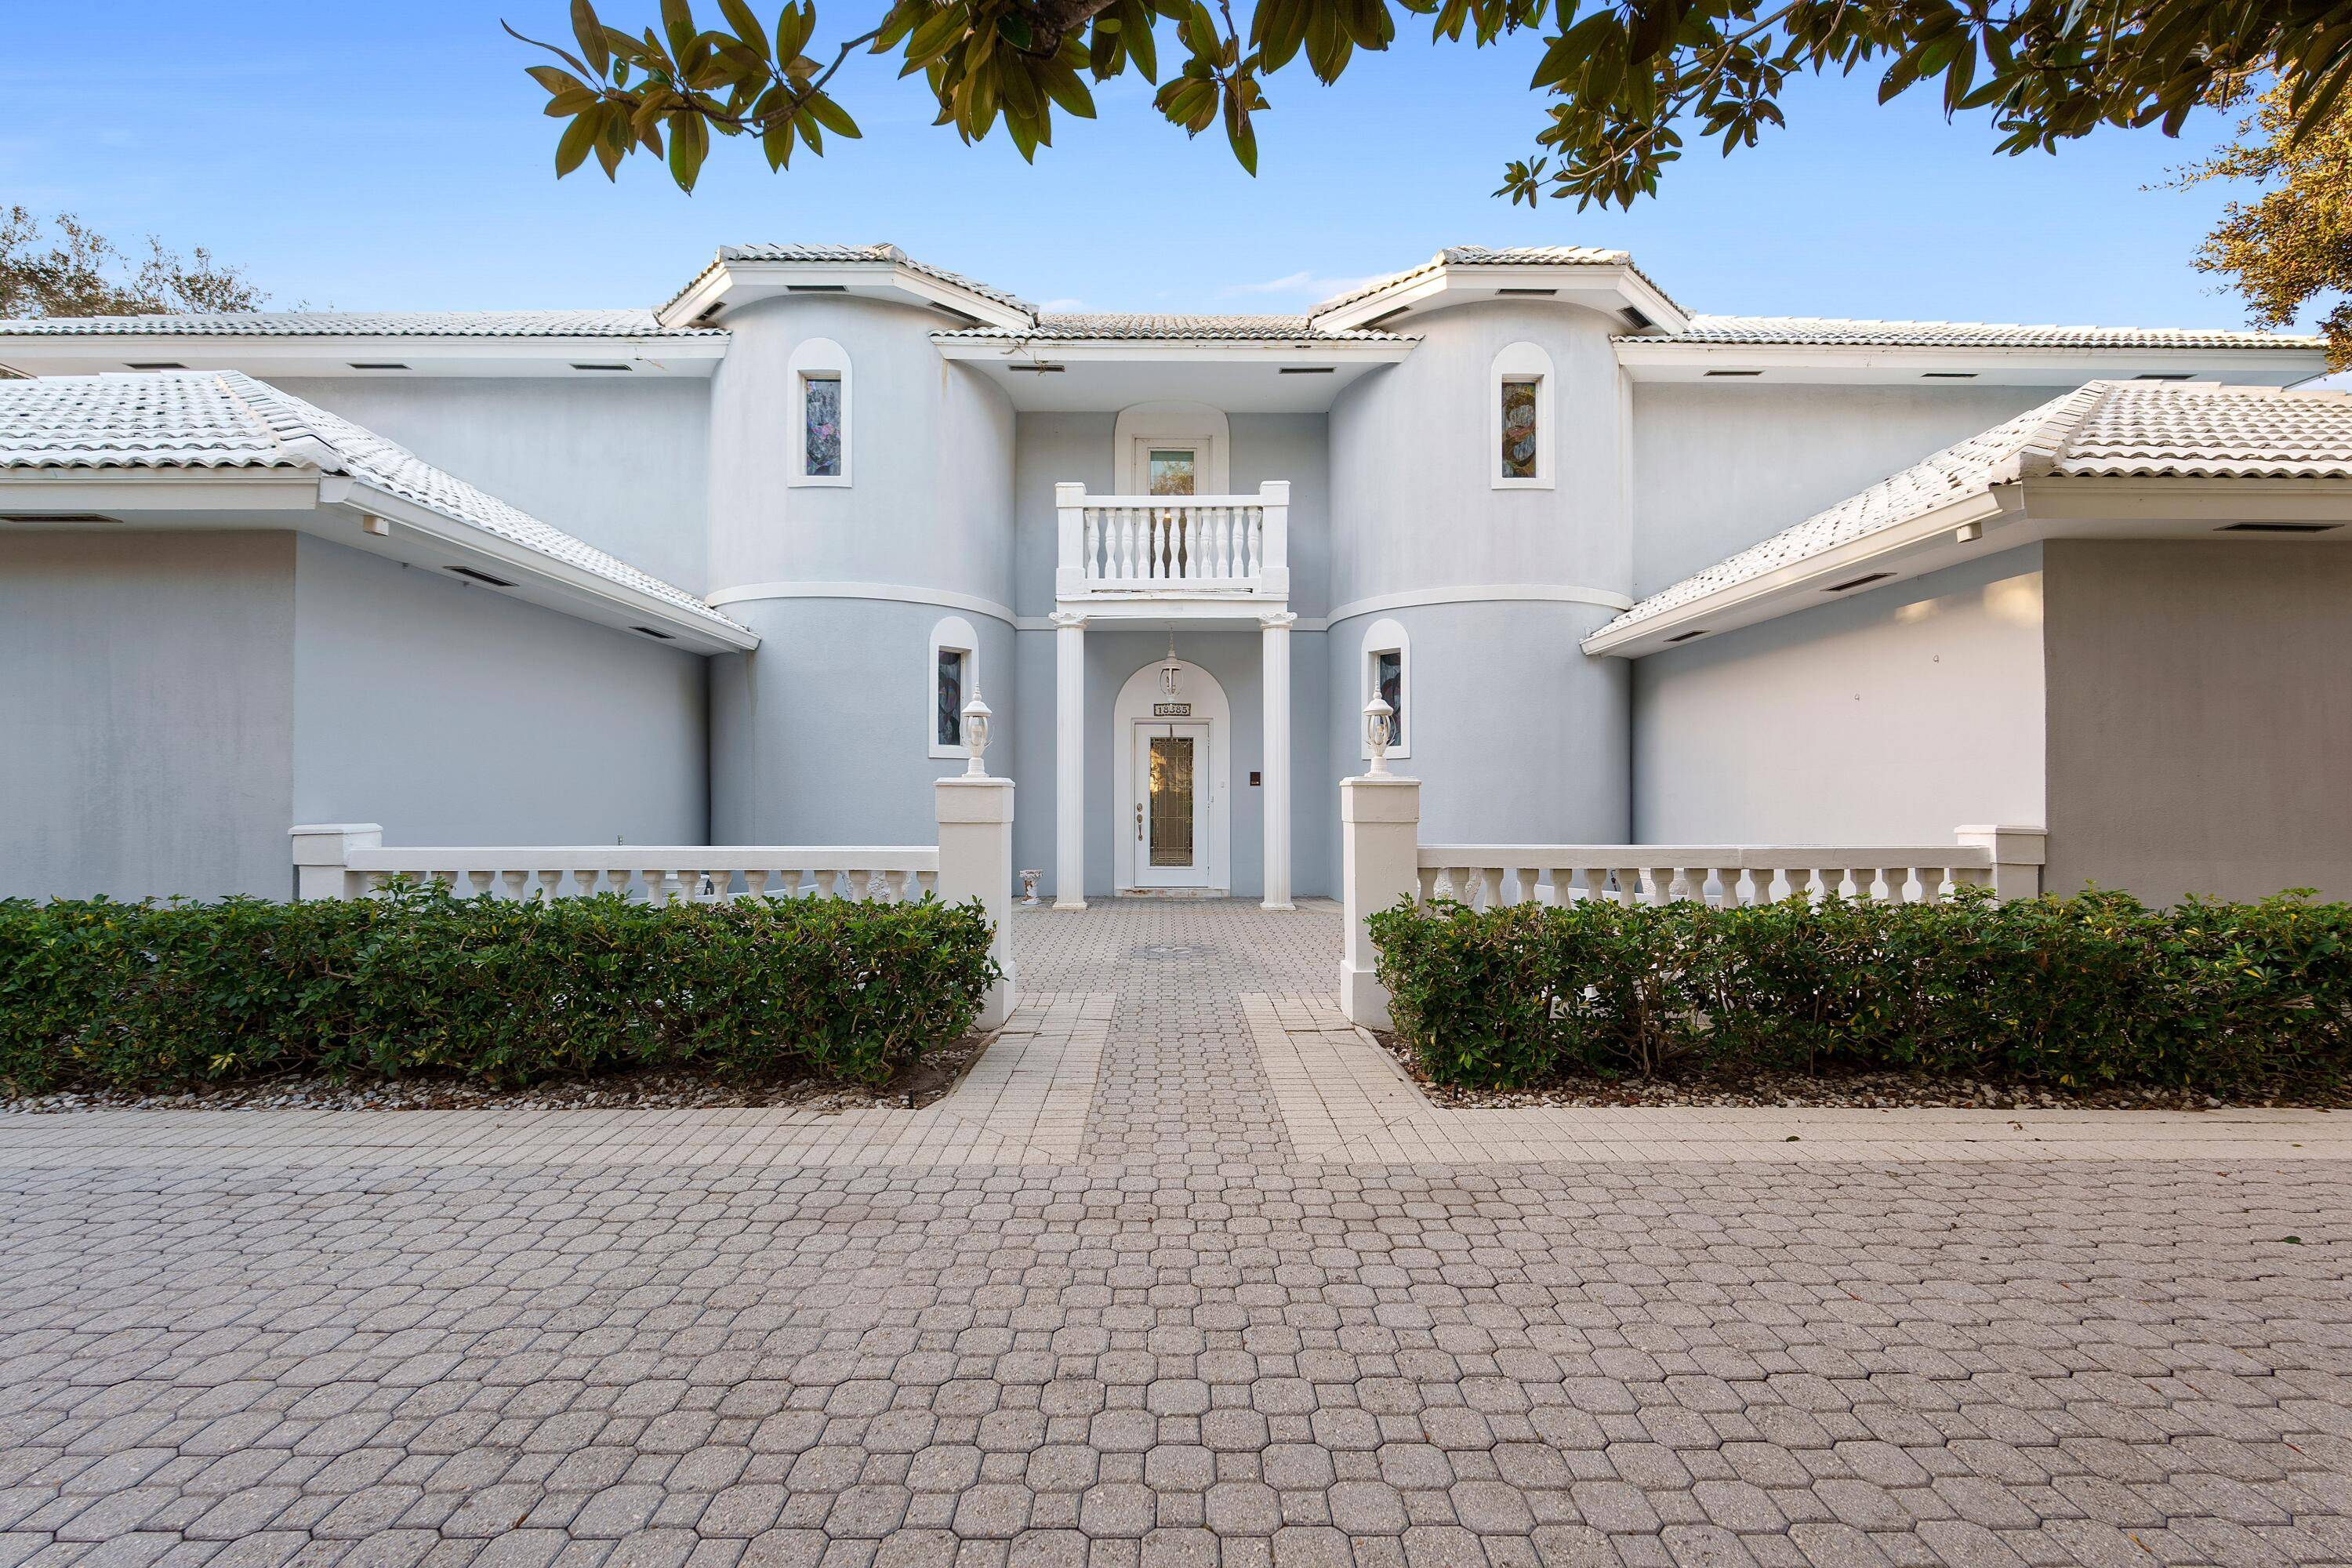 PRICE IMPROVEMENT ! Welcome to exclusive gated community of Jupiter Hills.